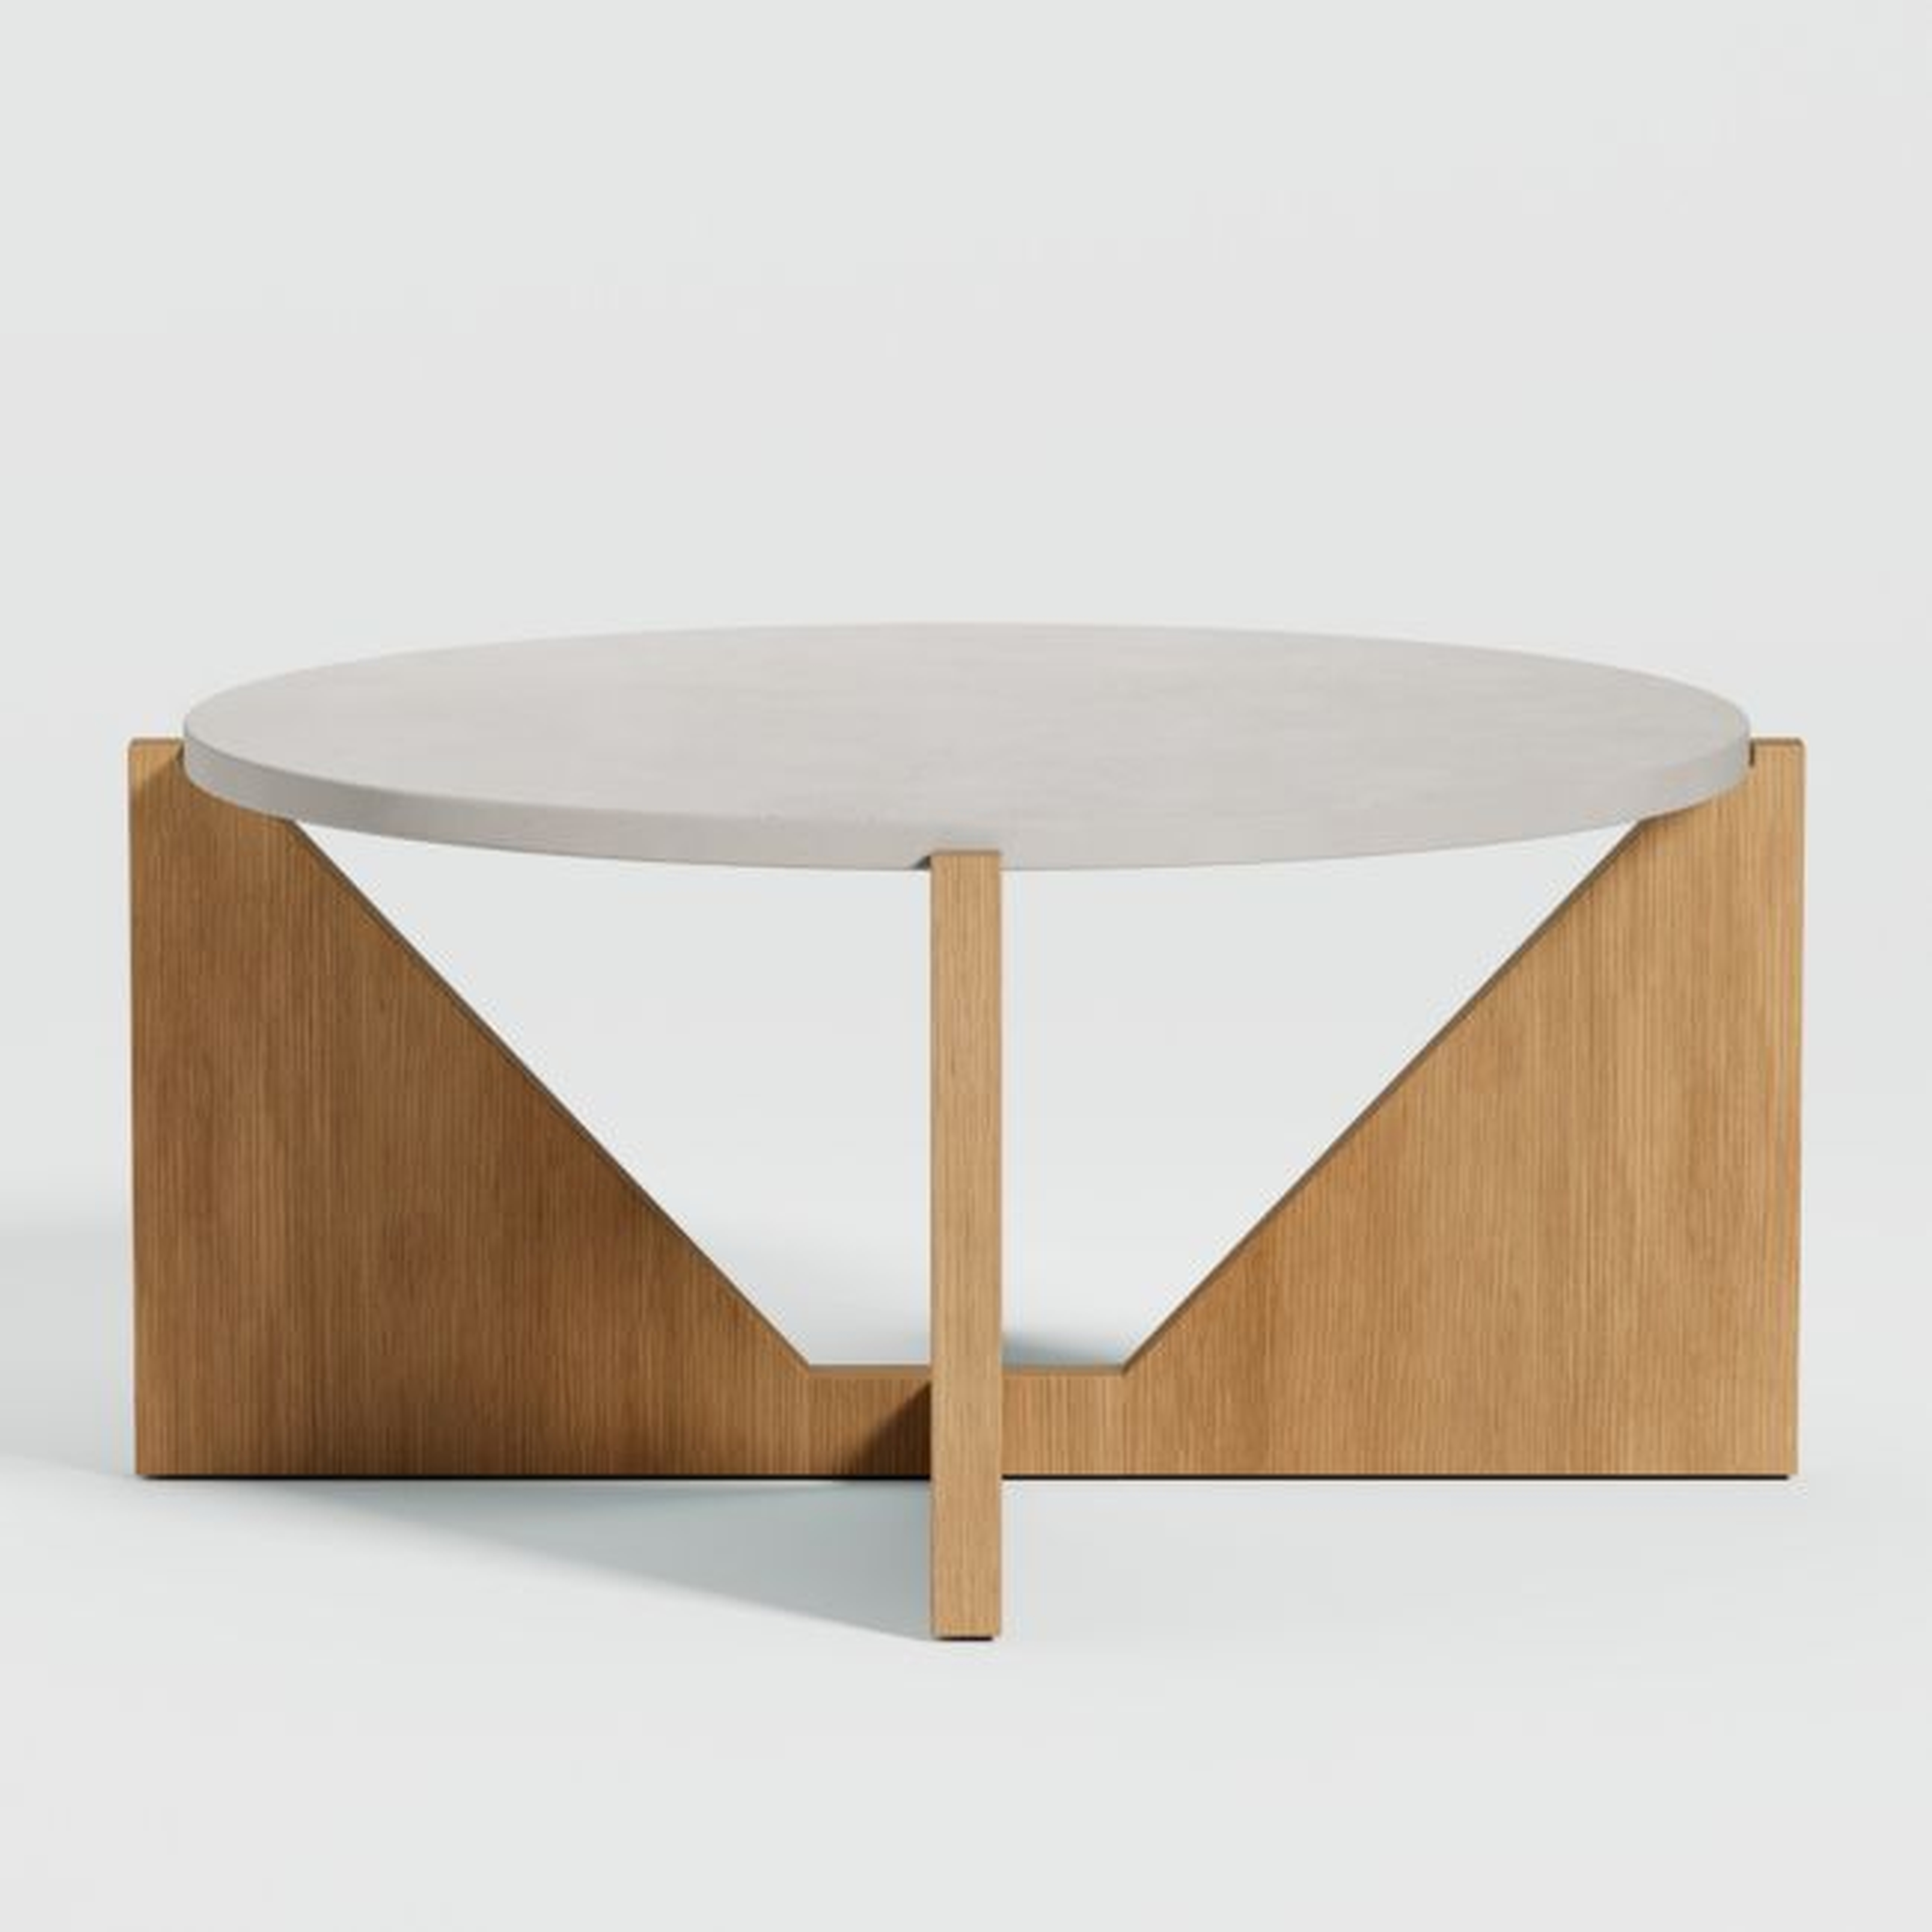 Miro Concrete Coffee Table with Natural White Oak Wood Base - Crate and Barrel